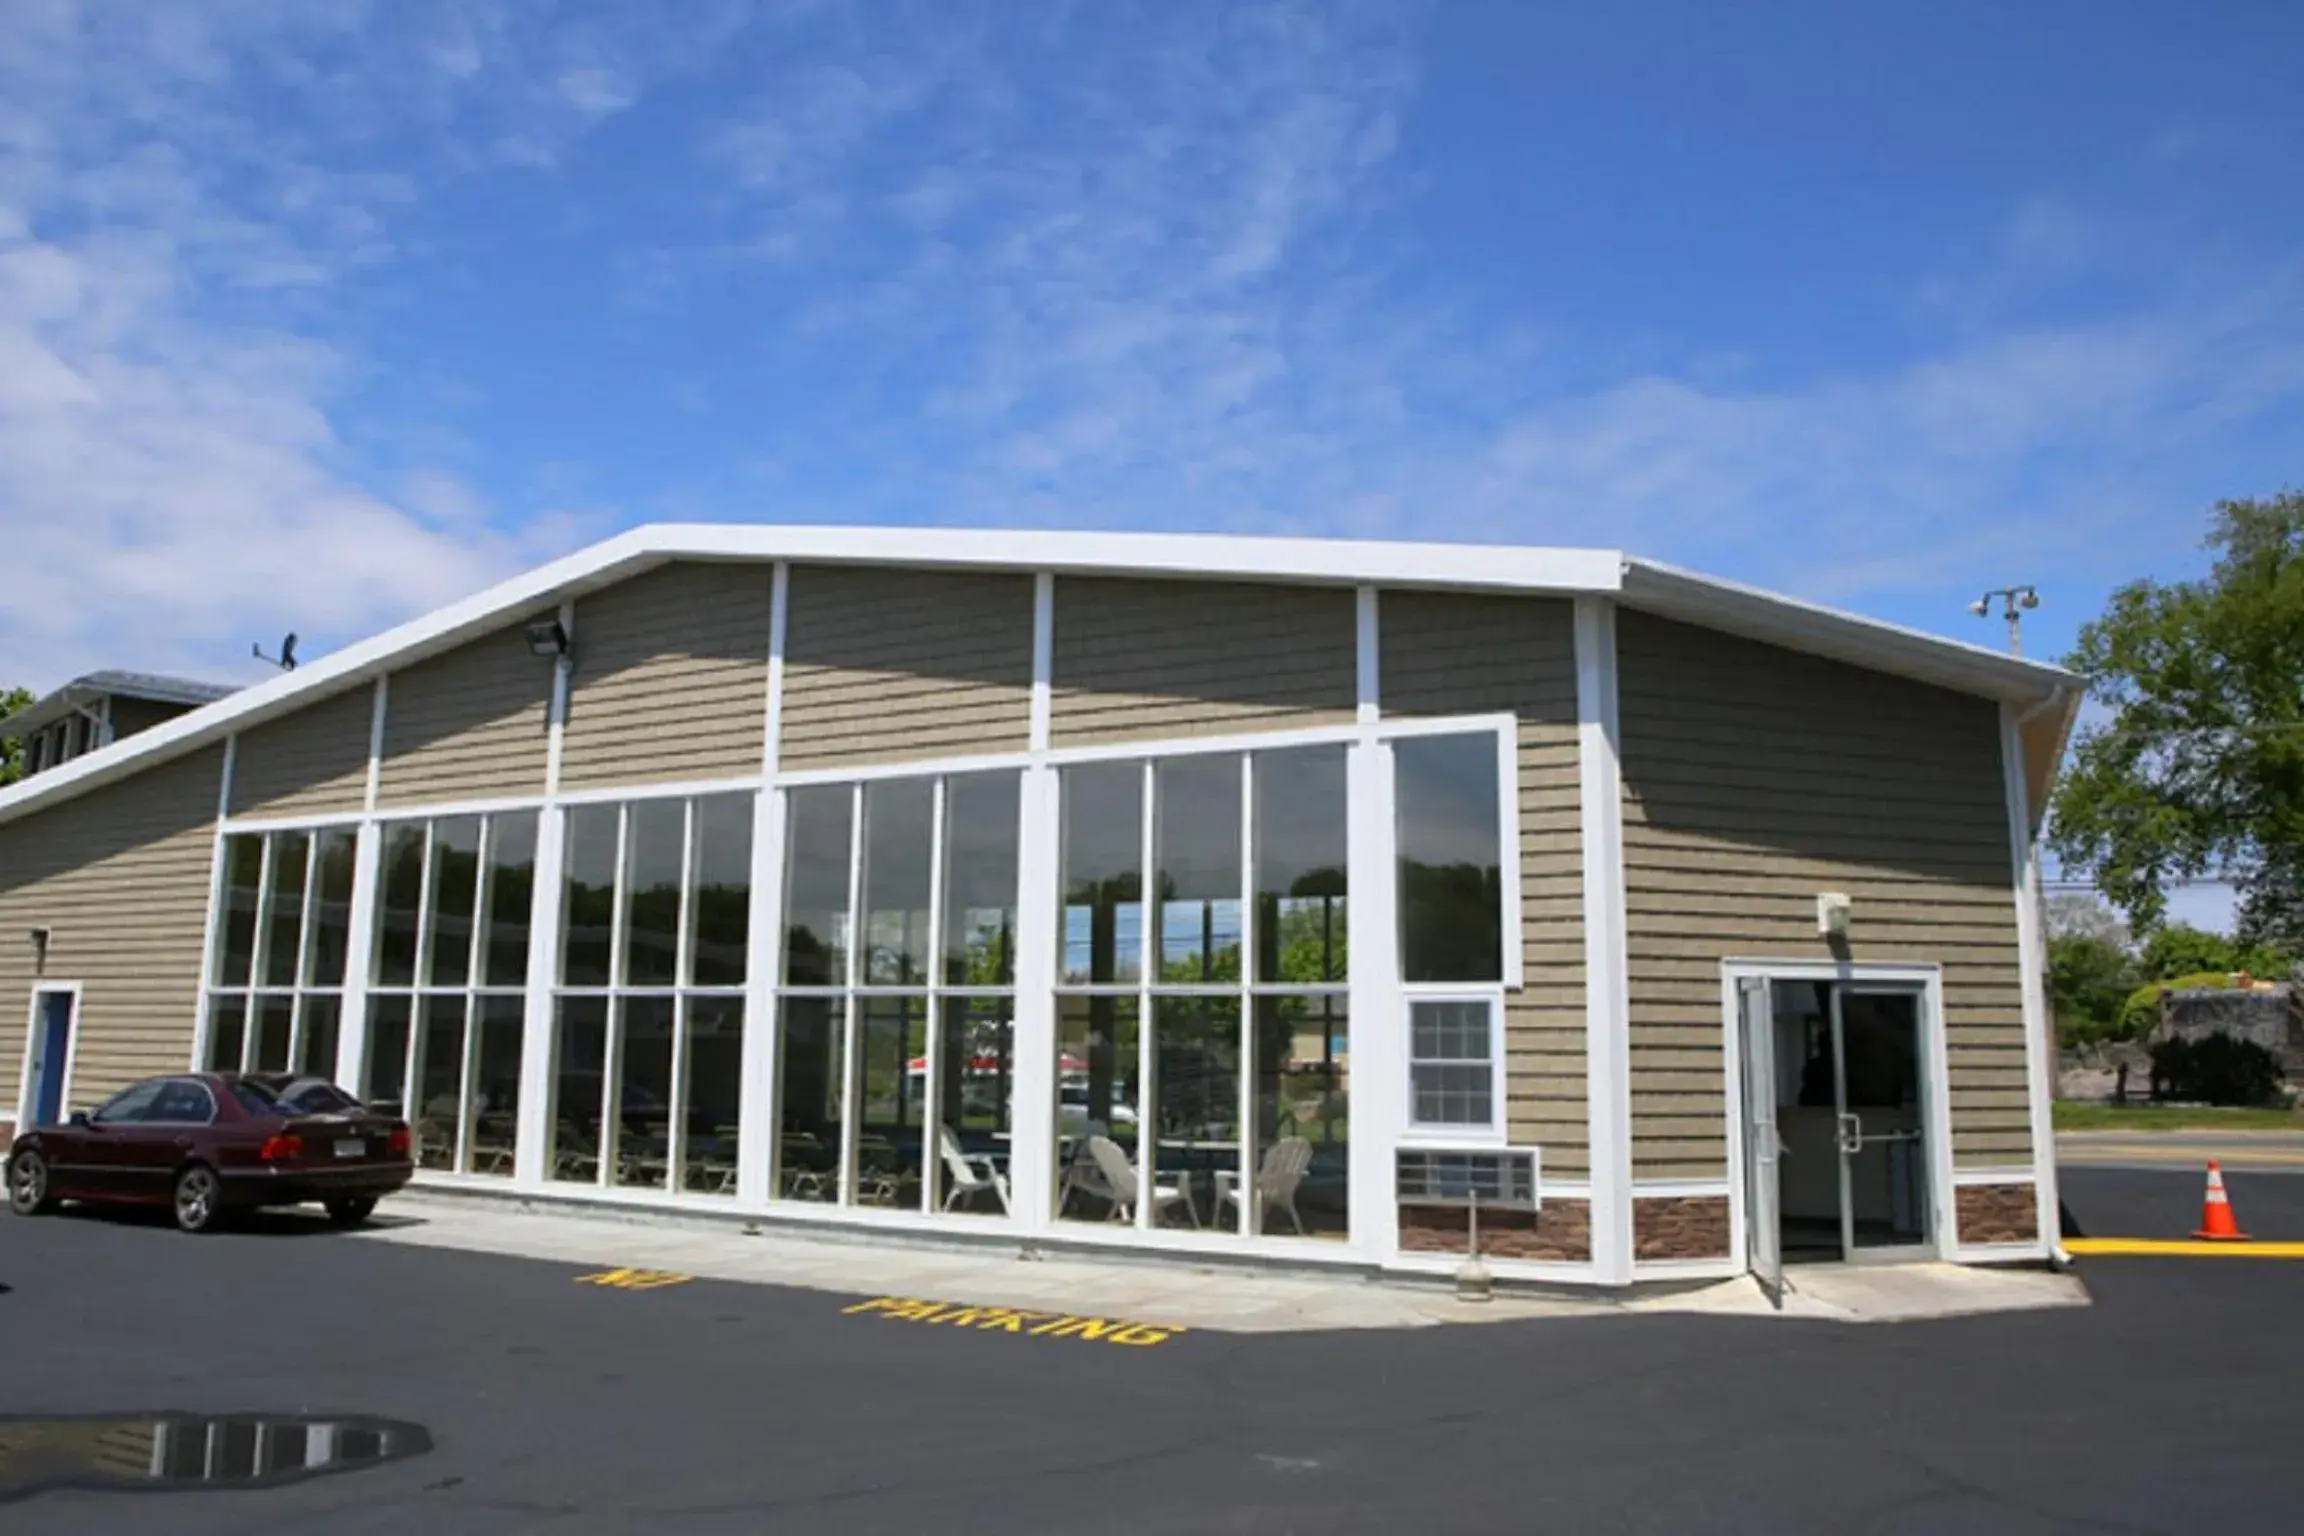 Facade/entrance, Property Building in Days Inn by Wyndham - Cape Cod Area